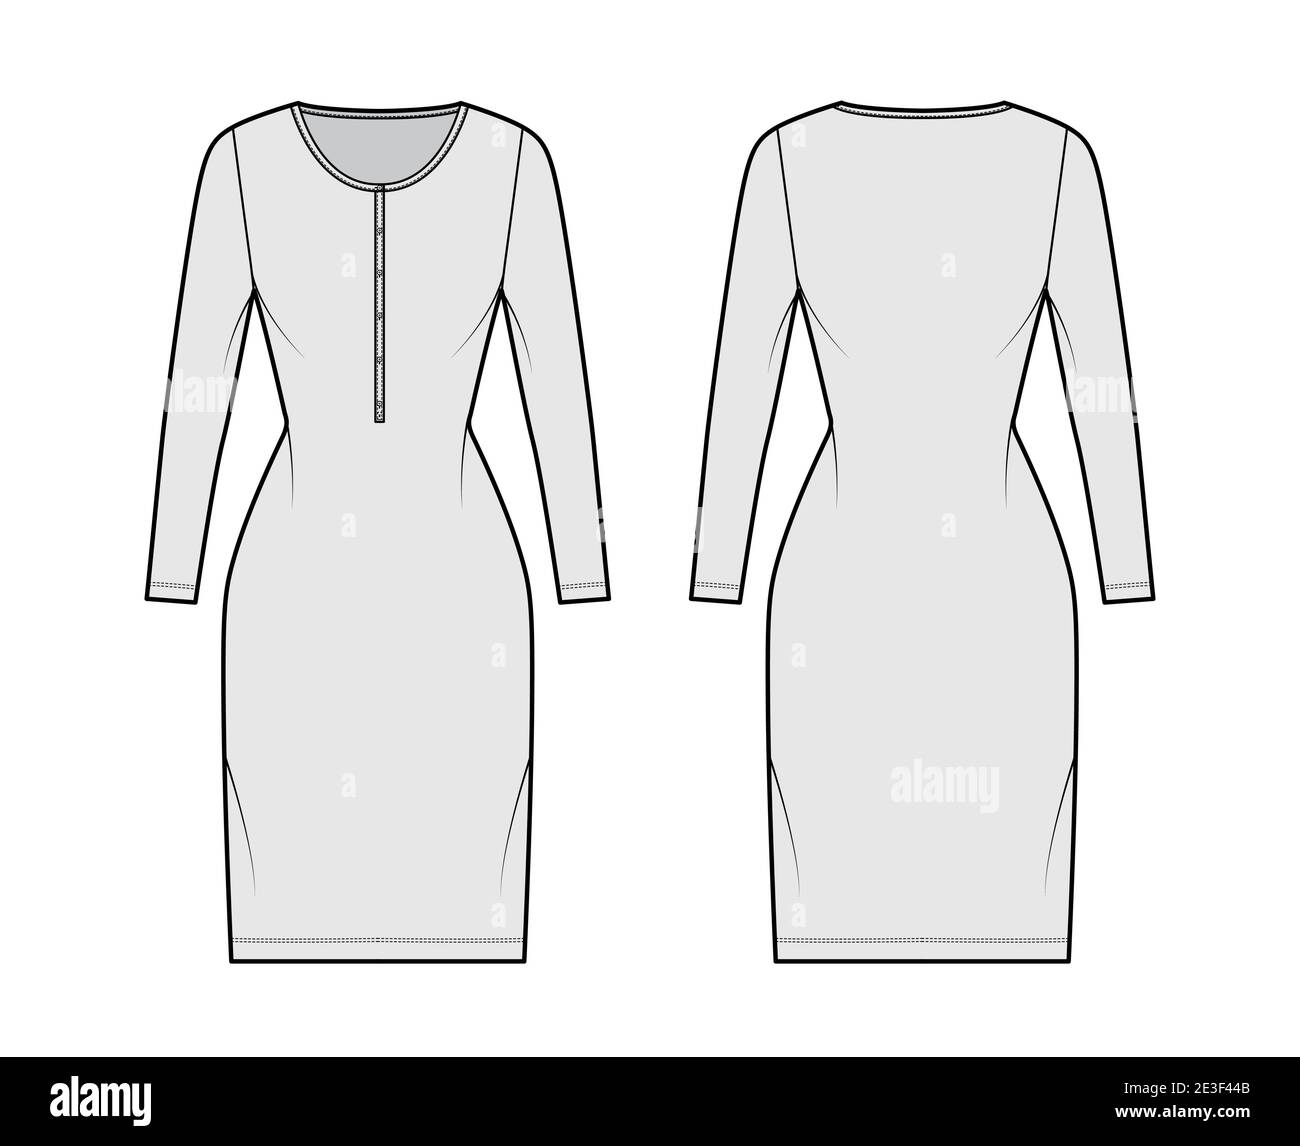 Shirt dress technical fashion illustration with henley neck, long sleeves, knee length, fitted body, Pencil fullness. Flat apparel template front, back, grey color. Women, men, unisex CAD mockup Stock Vector